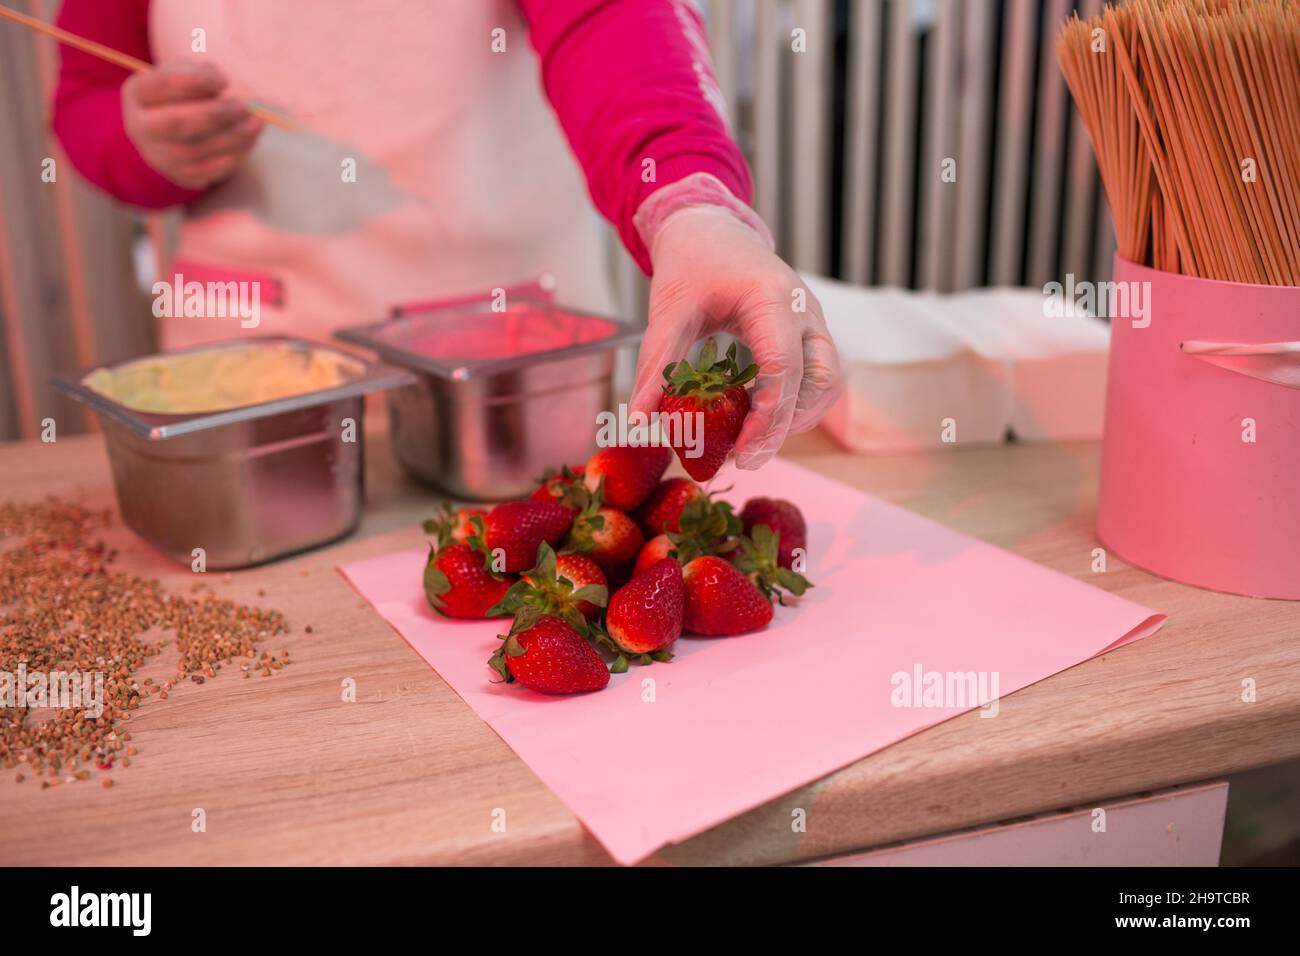 The pastry chef girl chooses strawberries for her cooking. chocolate-covered strawberries. Dipping in chocolate icing. Stock Photo